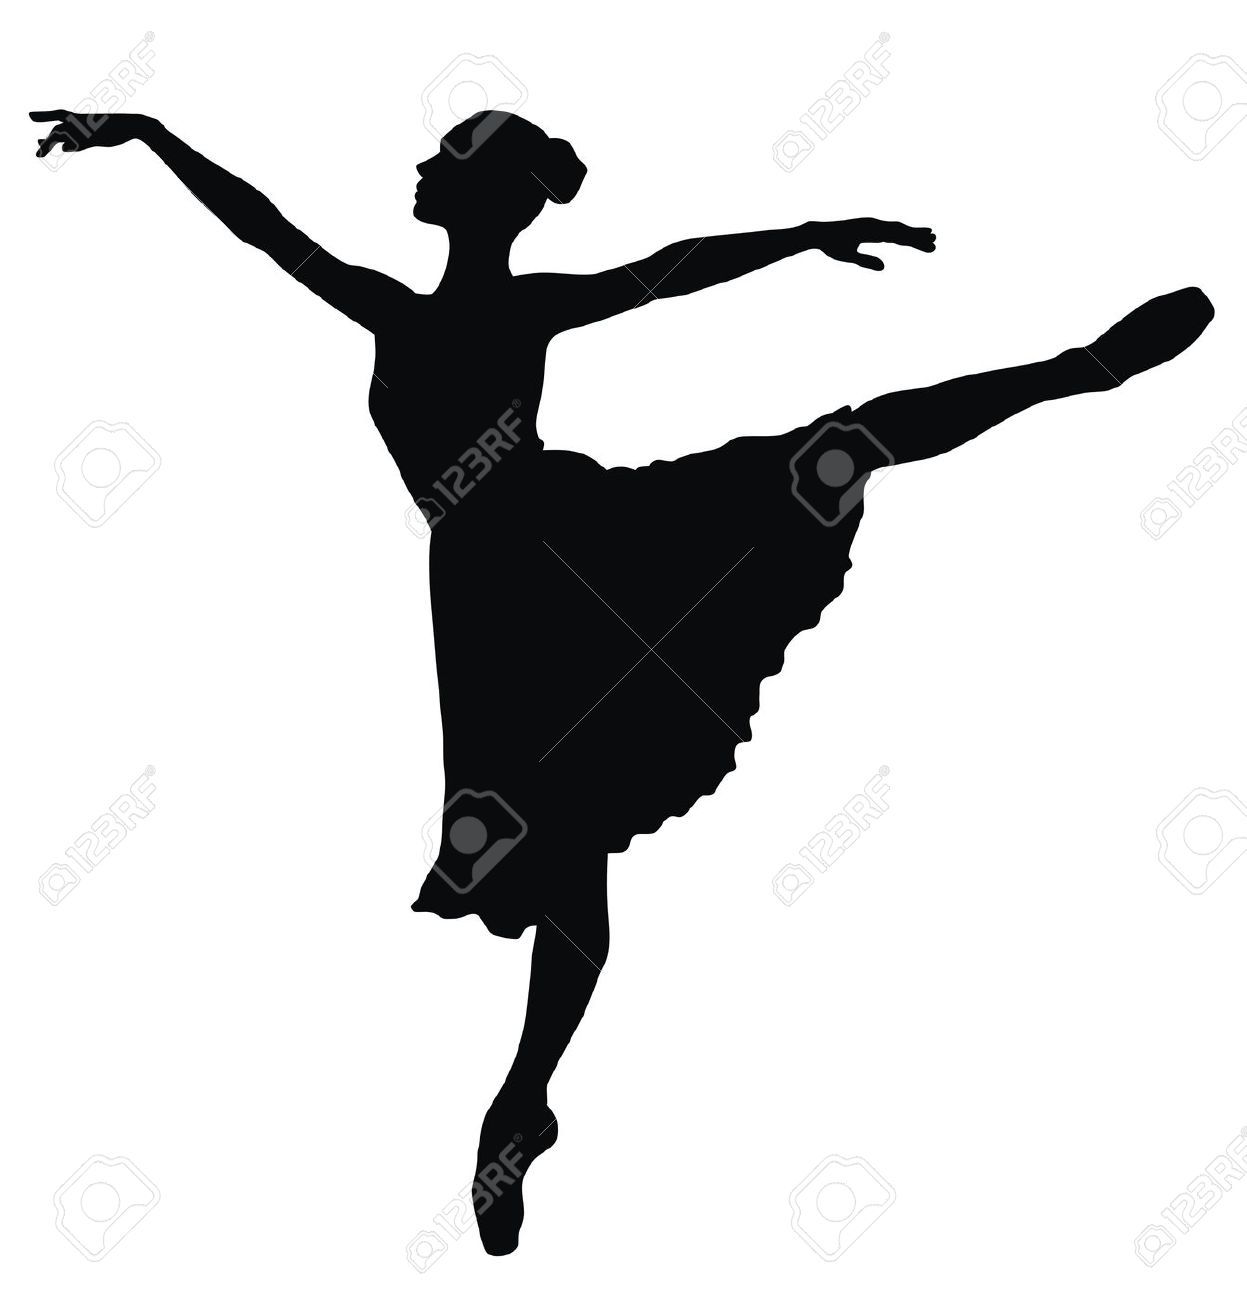 Ballerinas Cliparts, Stock Vector And Royalty Free